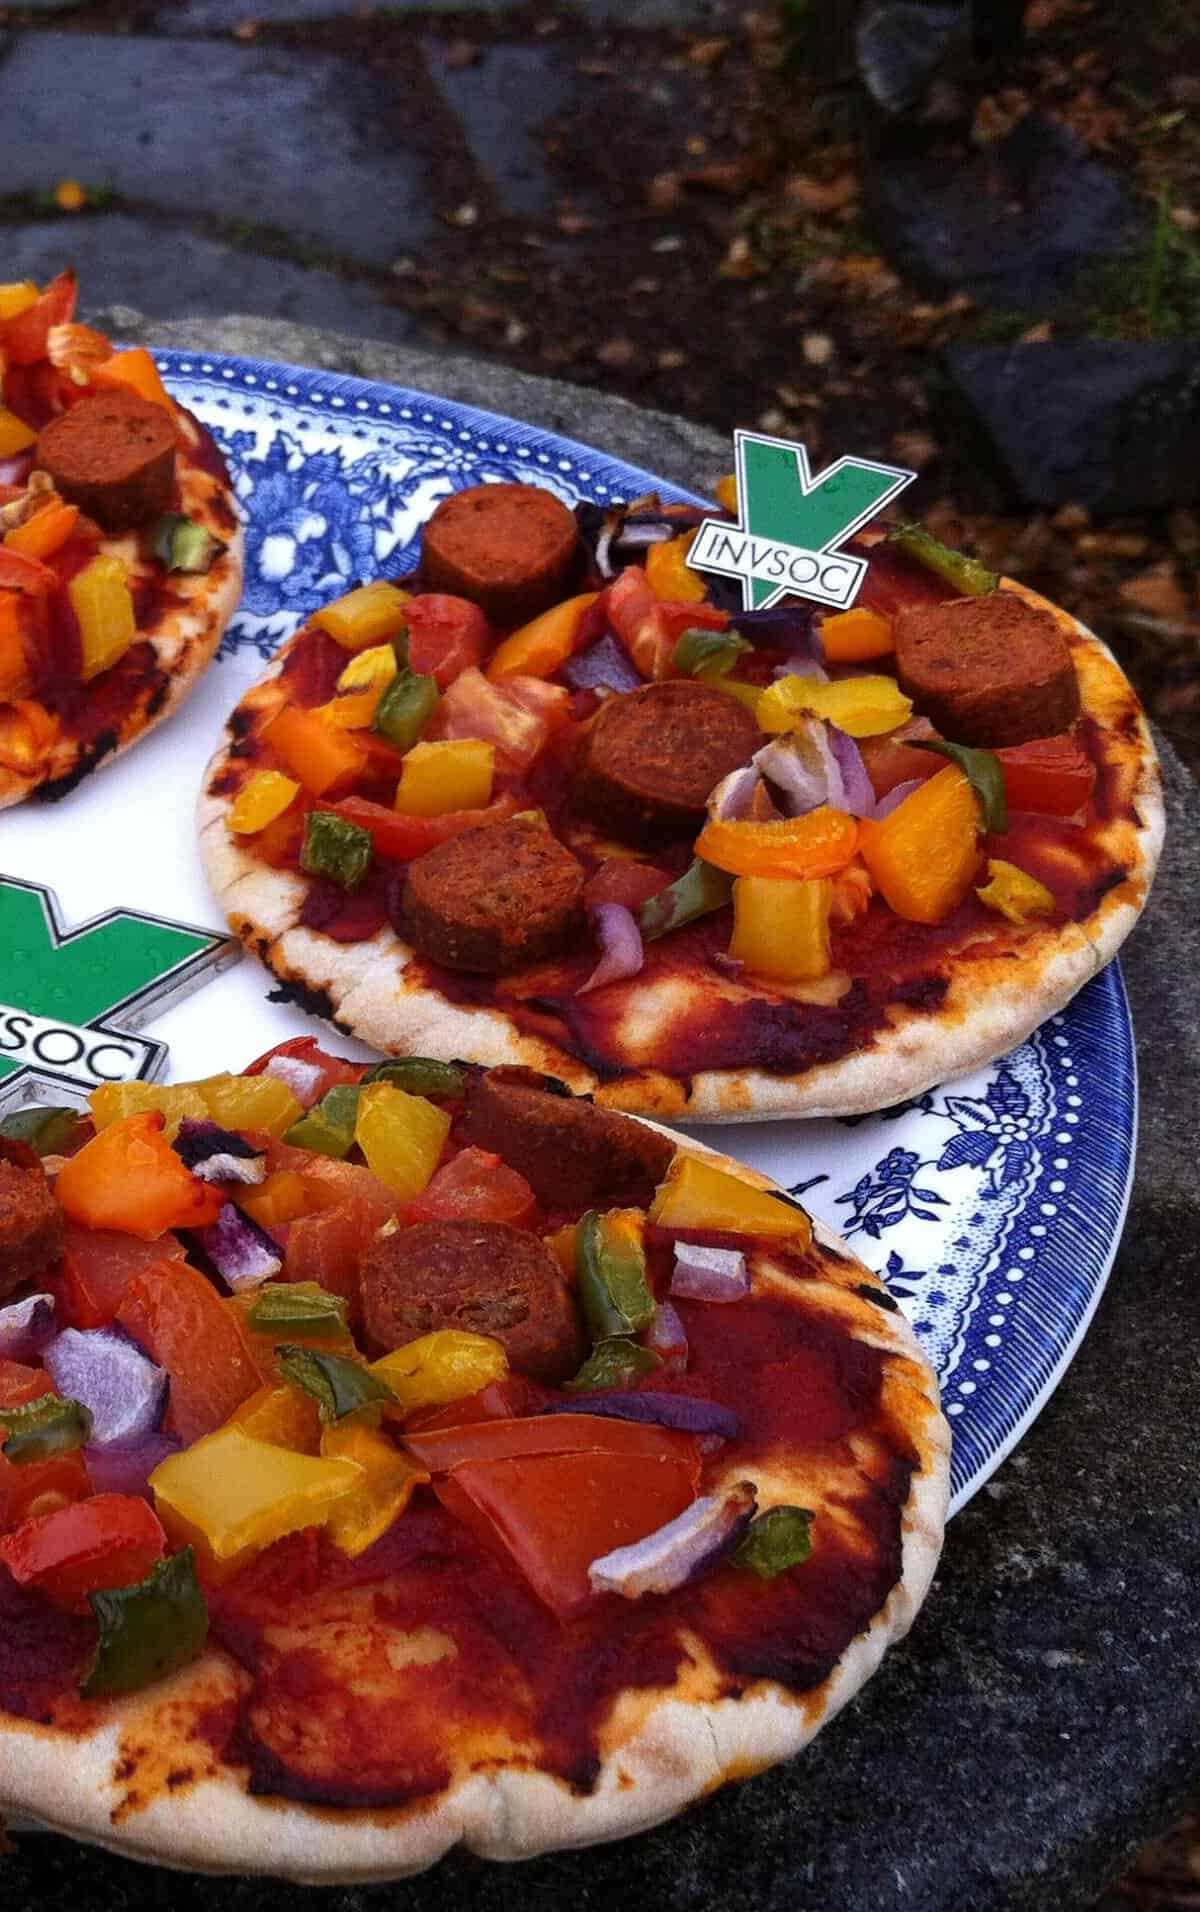  These mini pizzas are perfect for game day snacking!